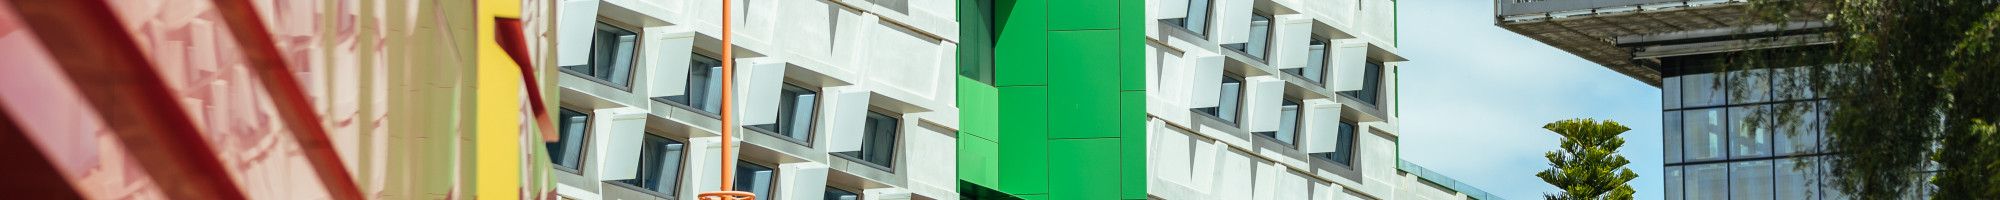 Dandenong Civic Centre - building with green and red paint